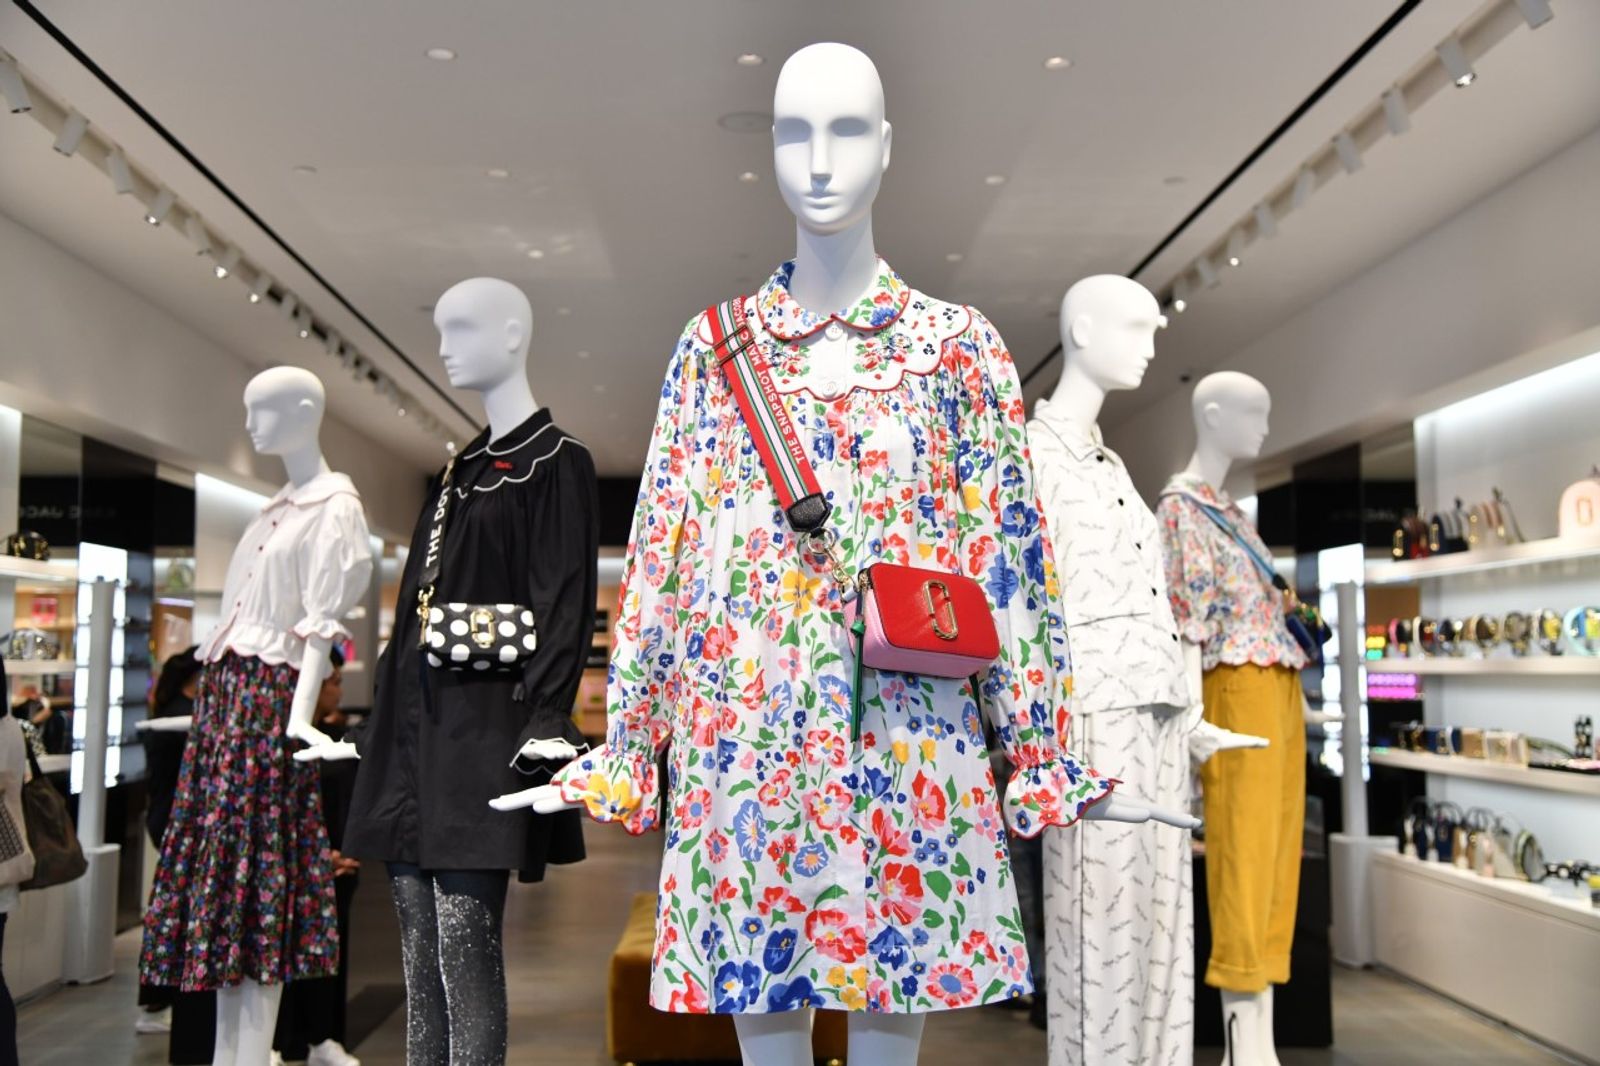 A Marc Jacobs flagship store has just opened in Bangkok | Lifestyle ...